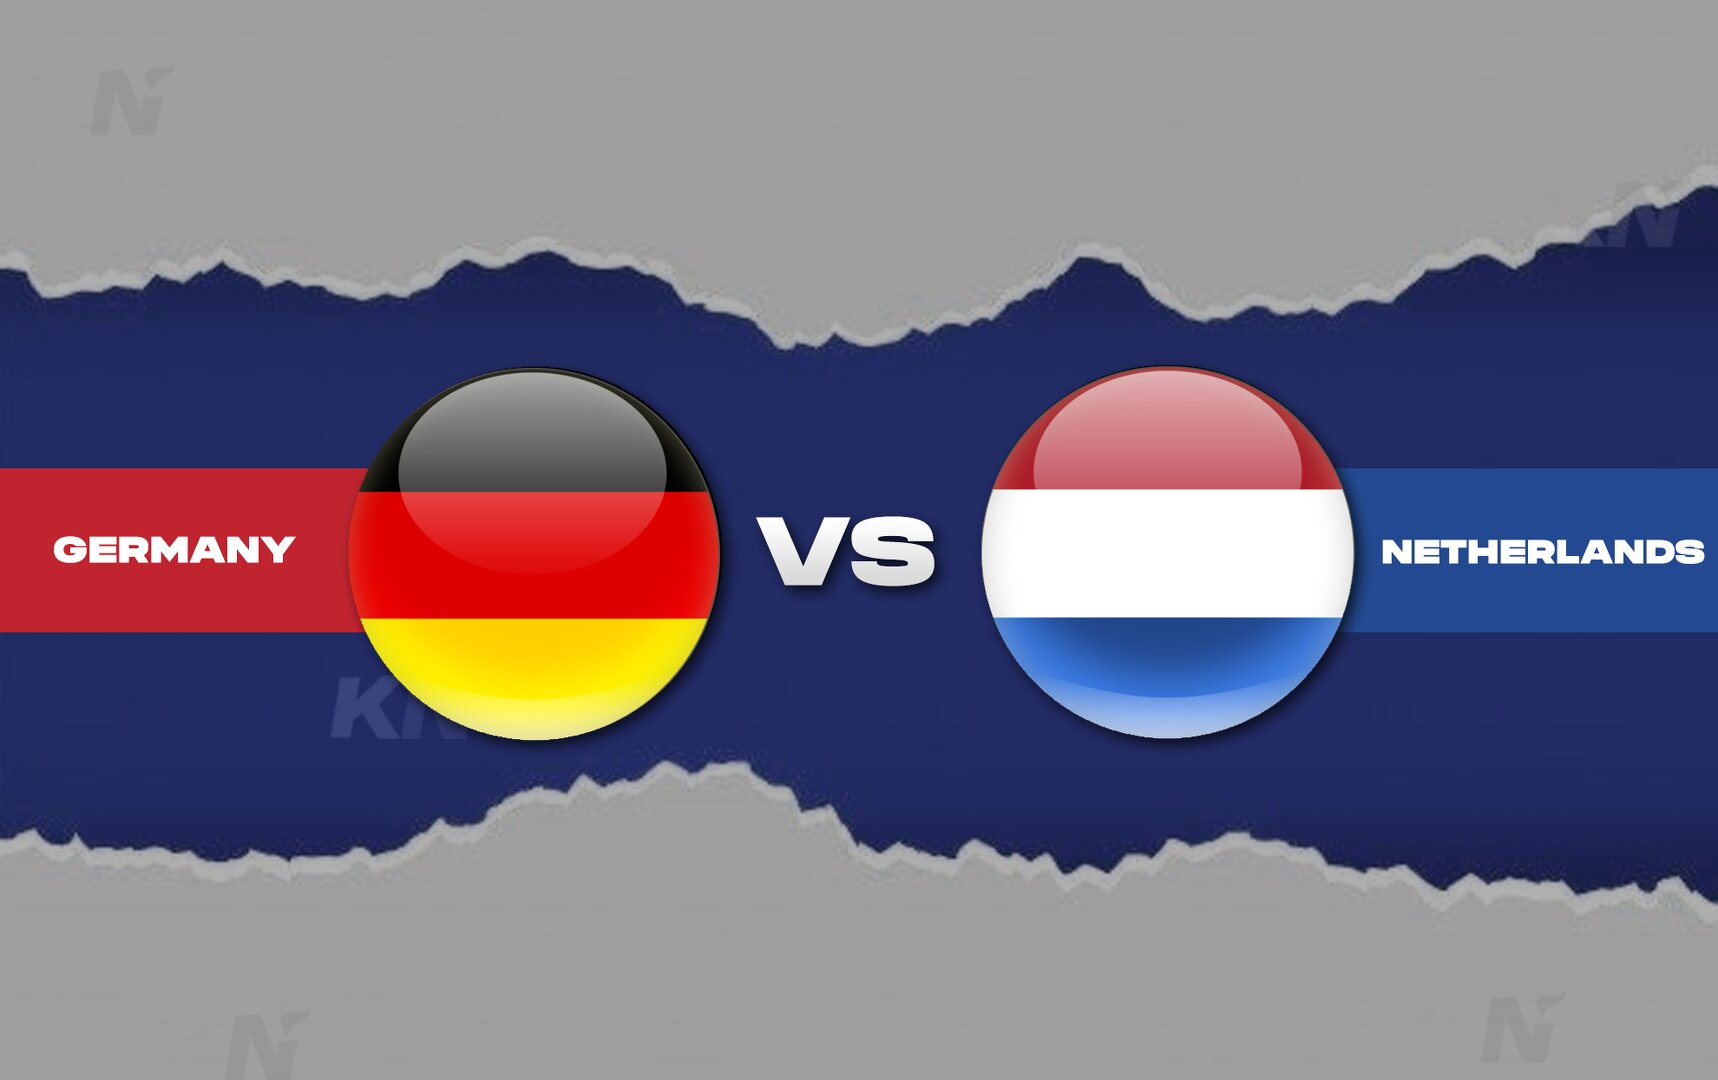 Germany vs Netherlands Live streaming, TV channel, kickoff time